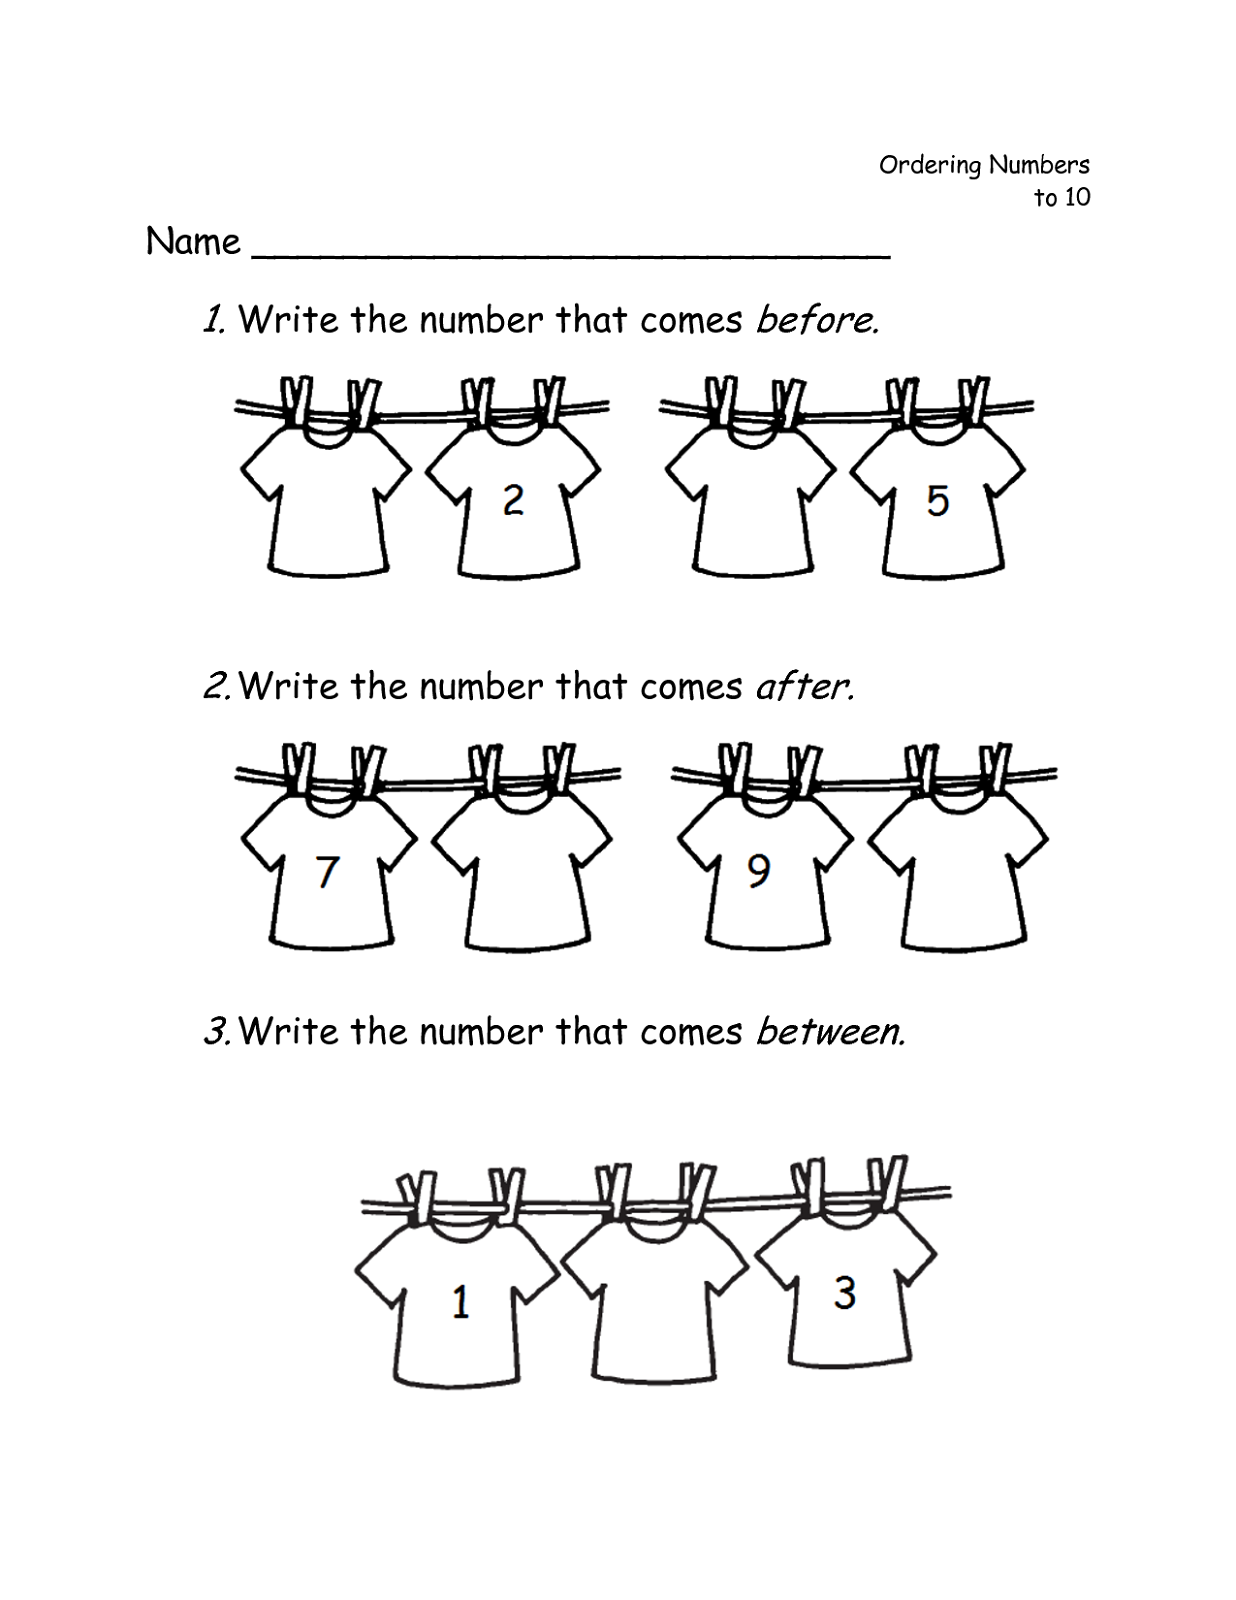 before-and-after-numbers-spring-math-worksheets-and-activities-for-before-and-after-and